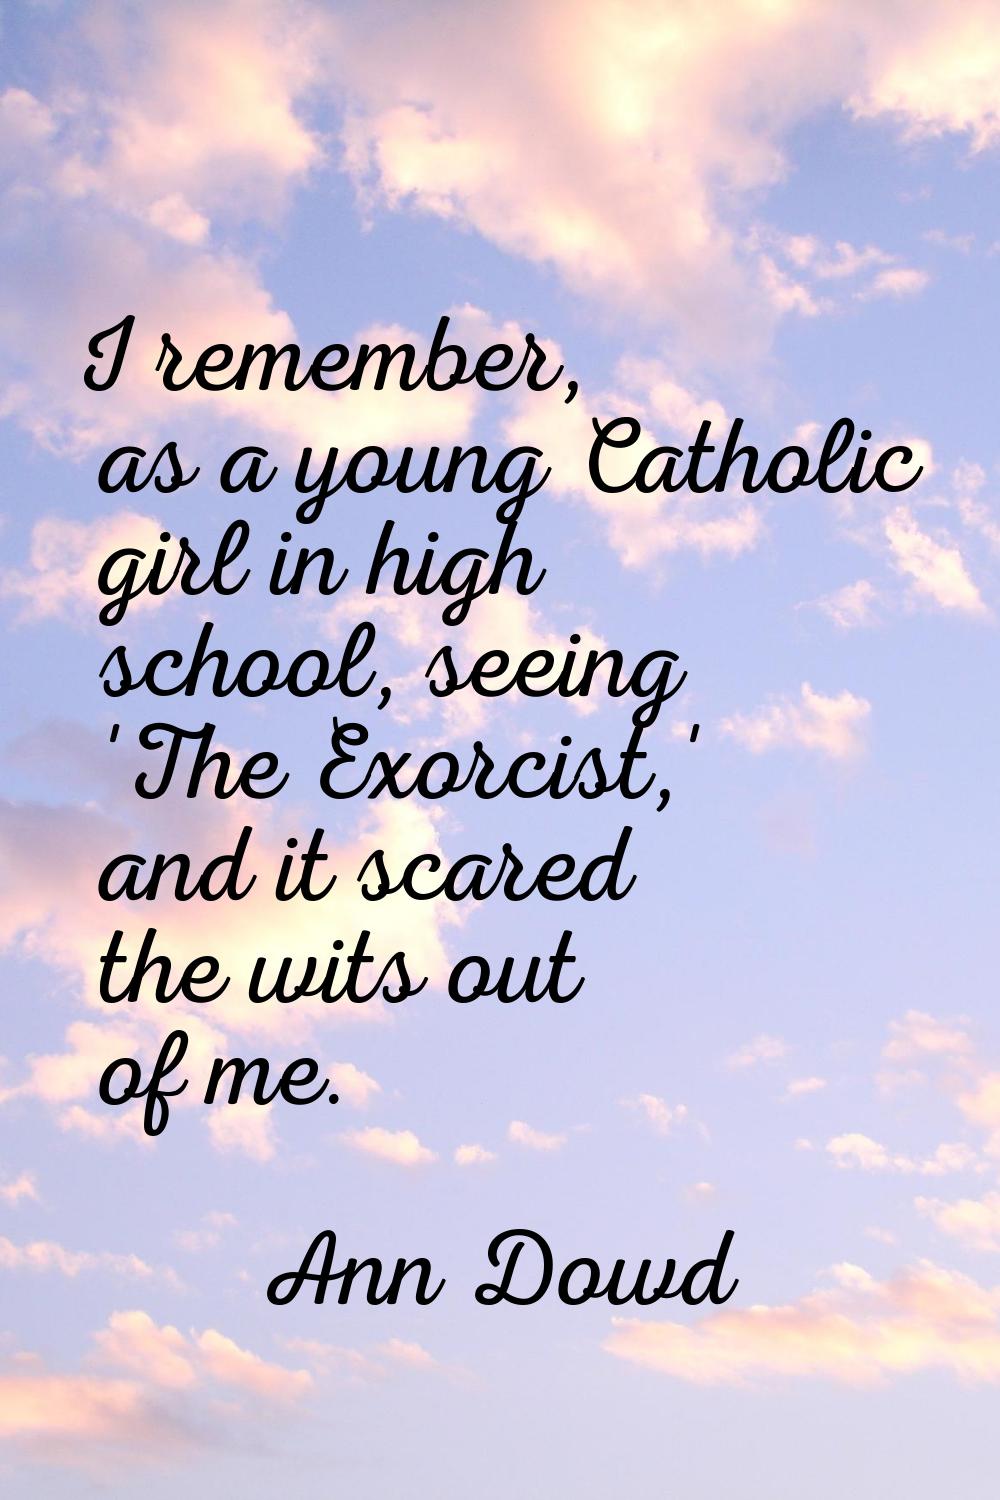 I remember, as a young Catholic girl in high school, seeing 'The Exorcist,' and it scared the wits 